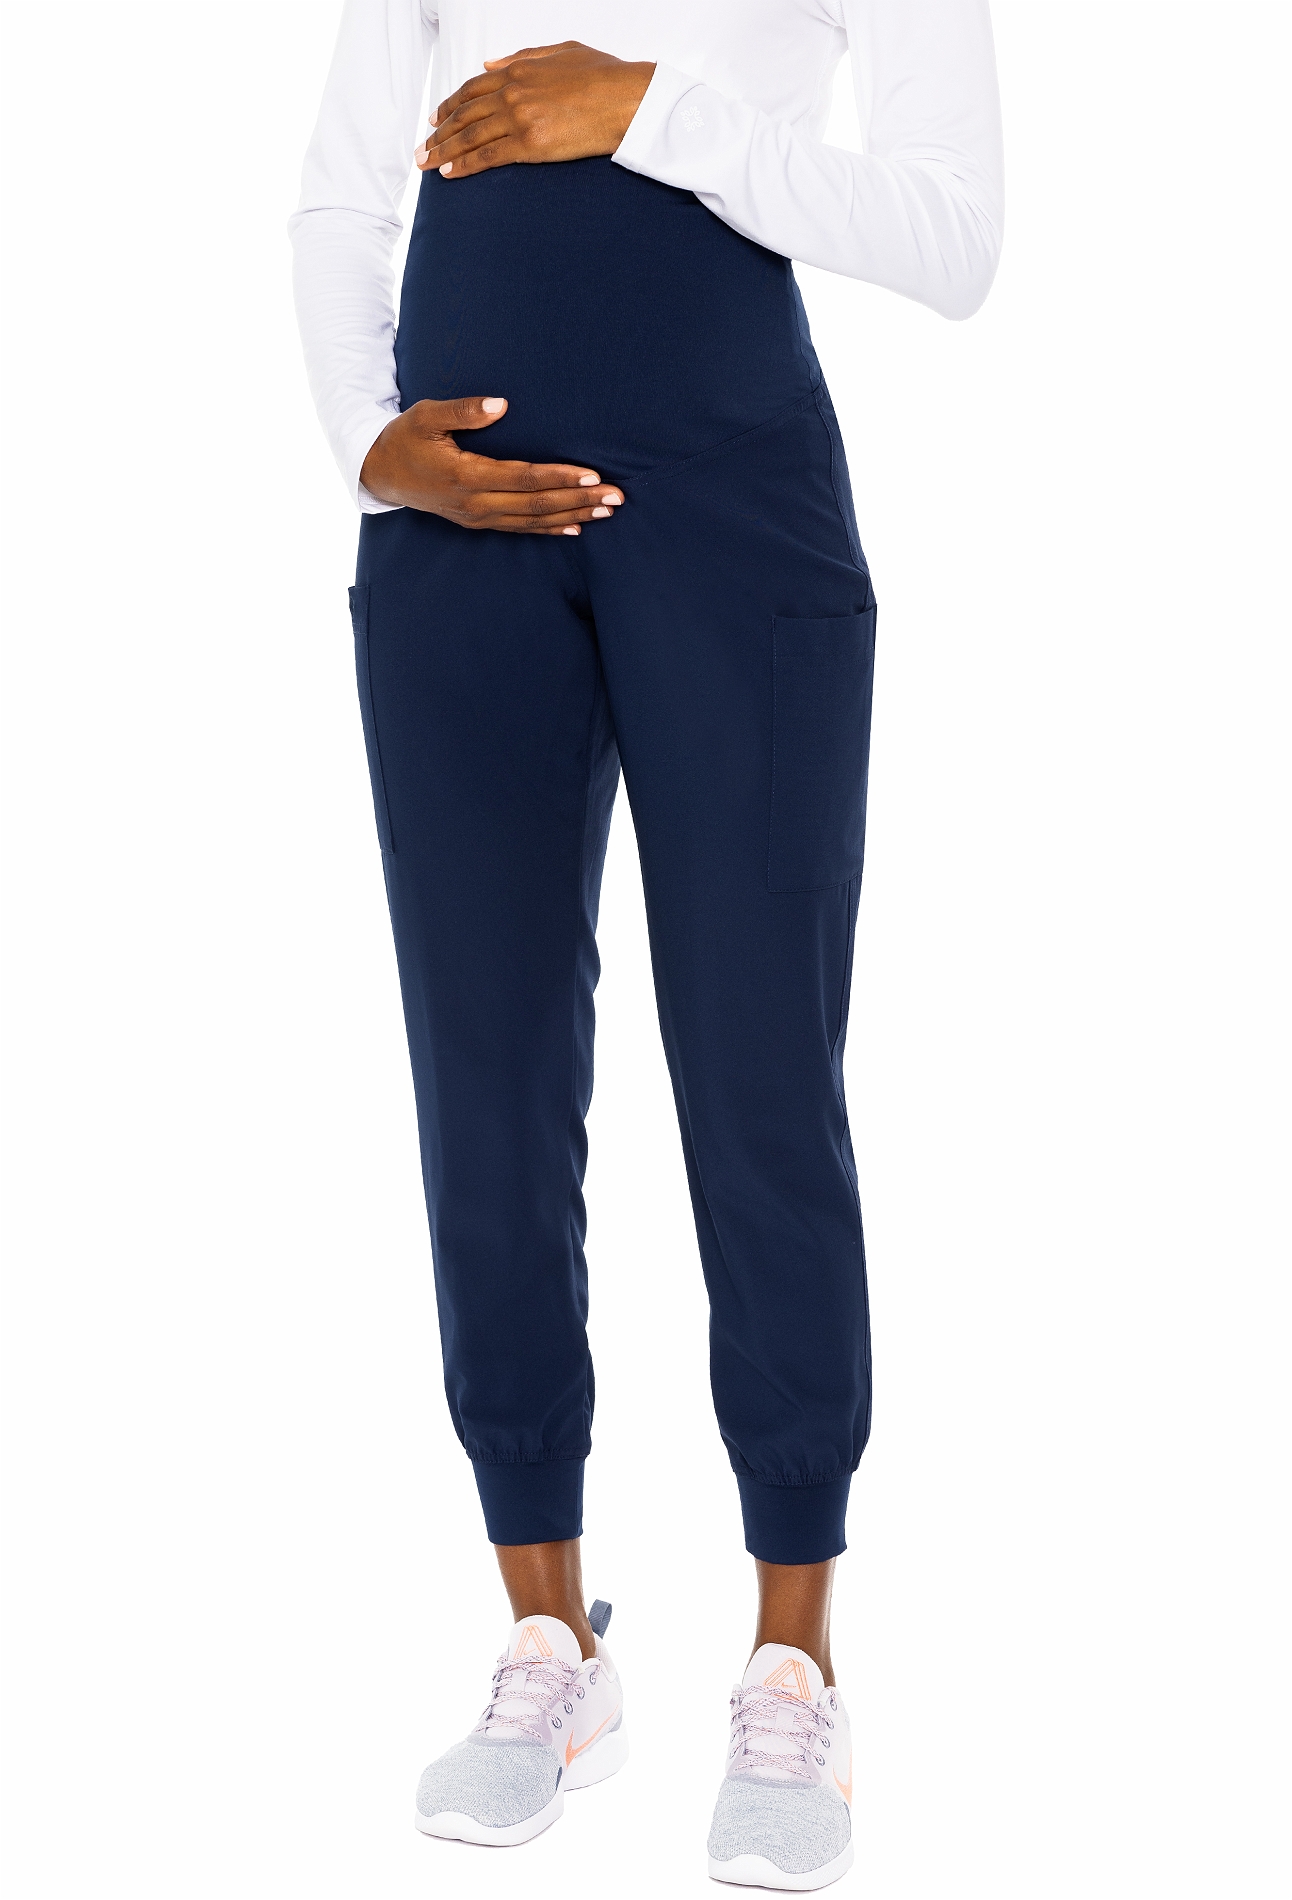 Med Couture Maternity Women's Maternity Jogger-8729